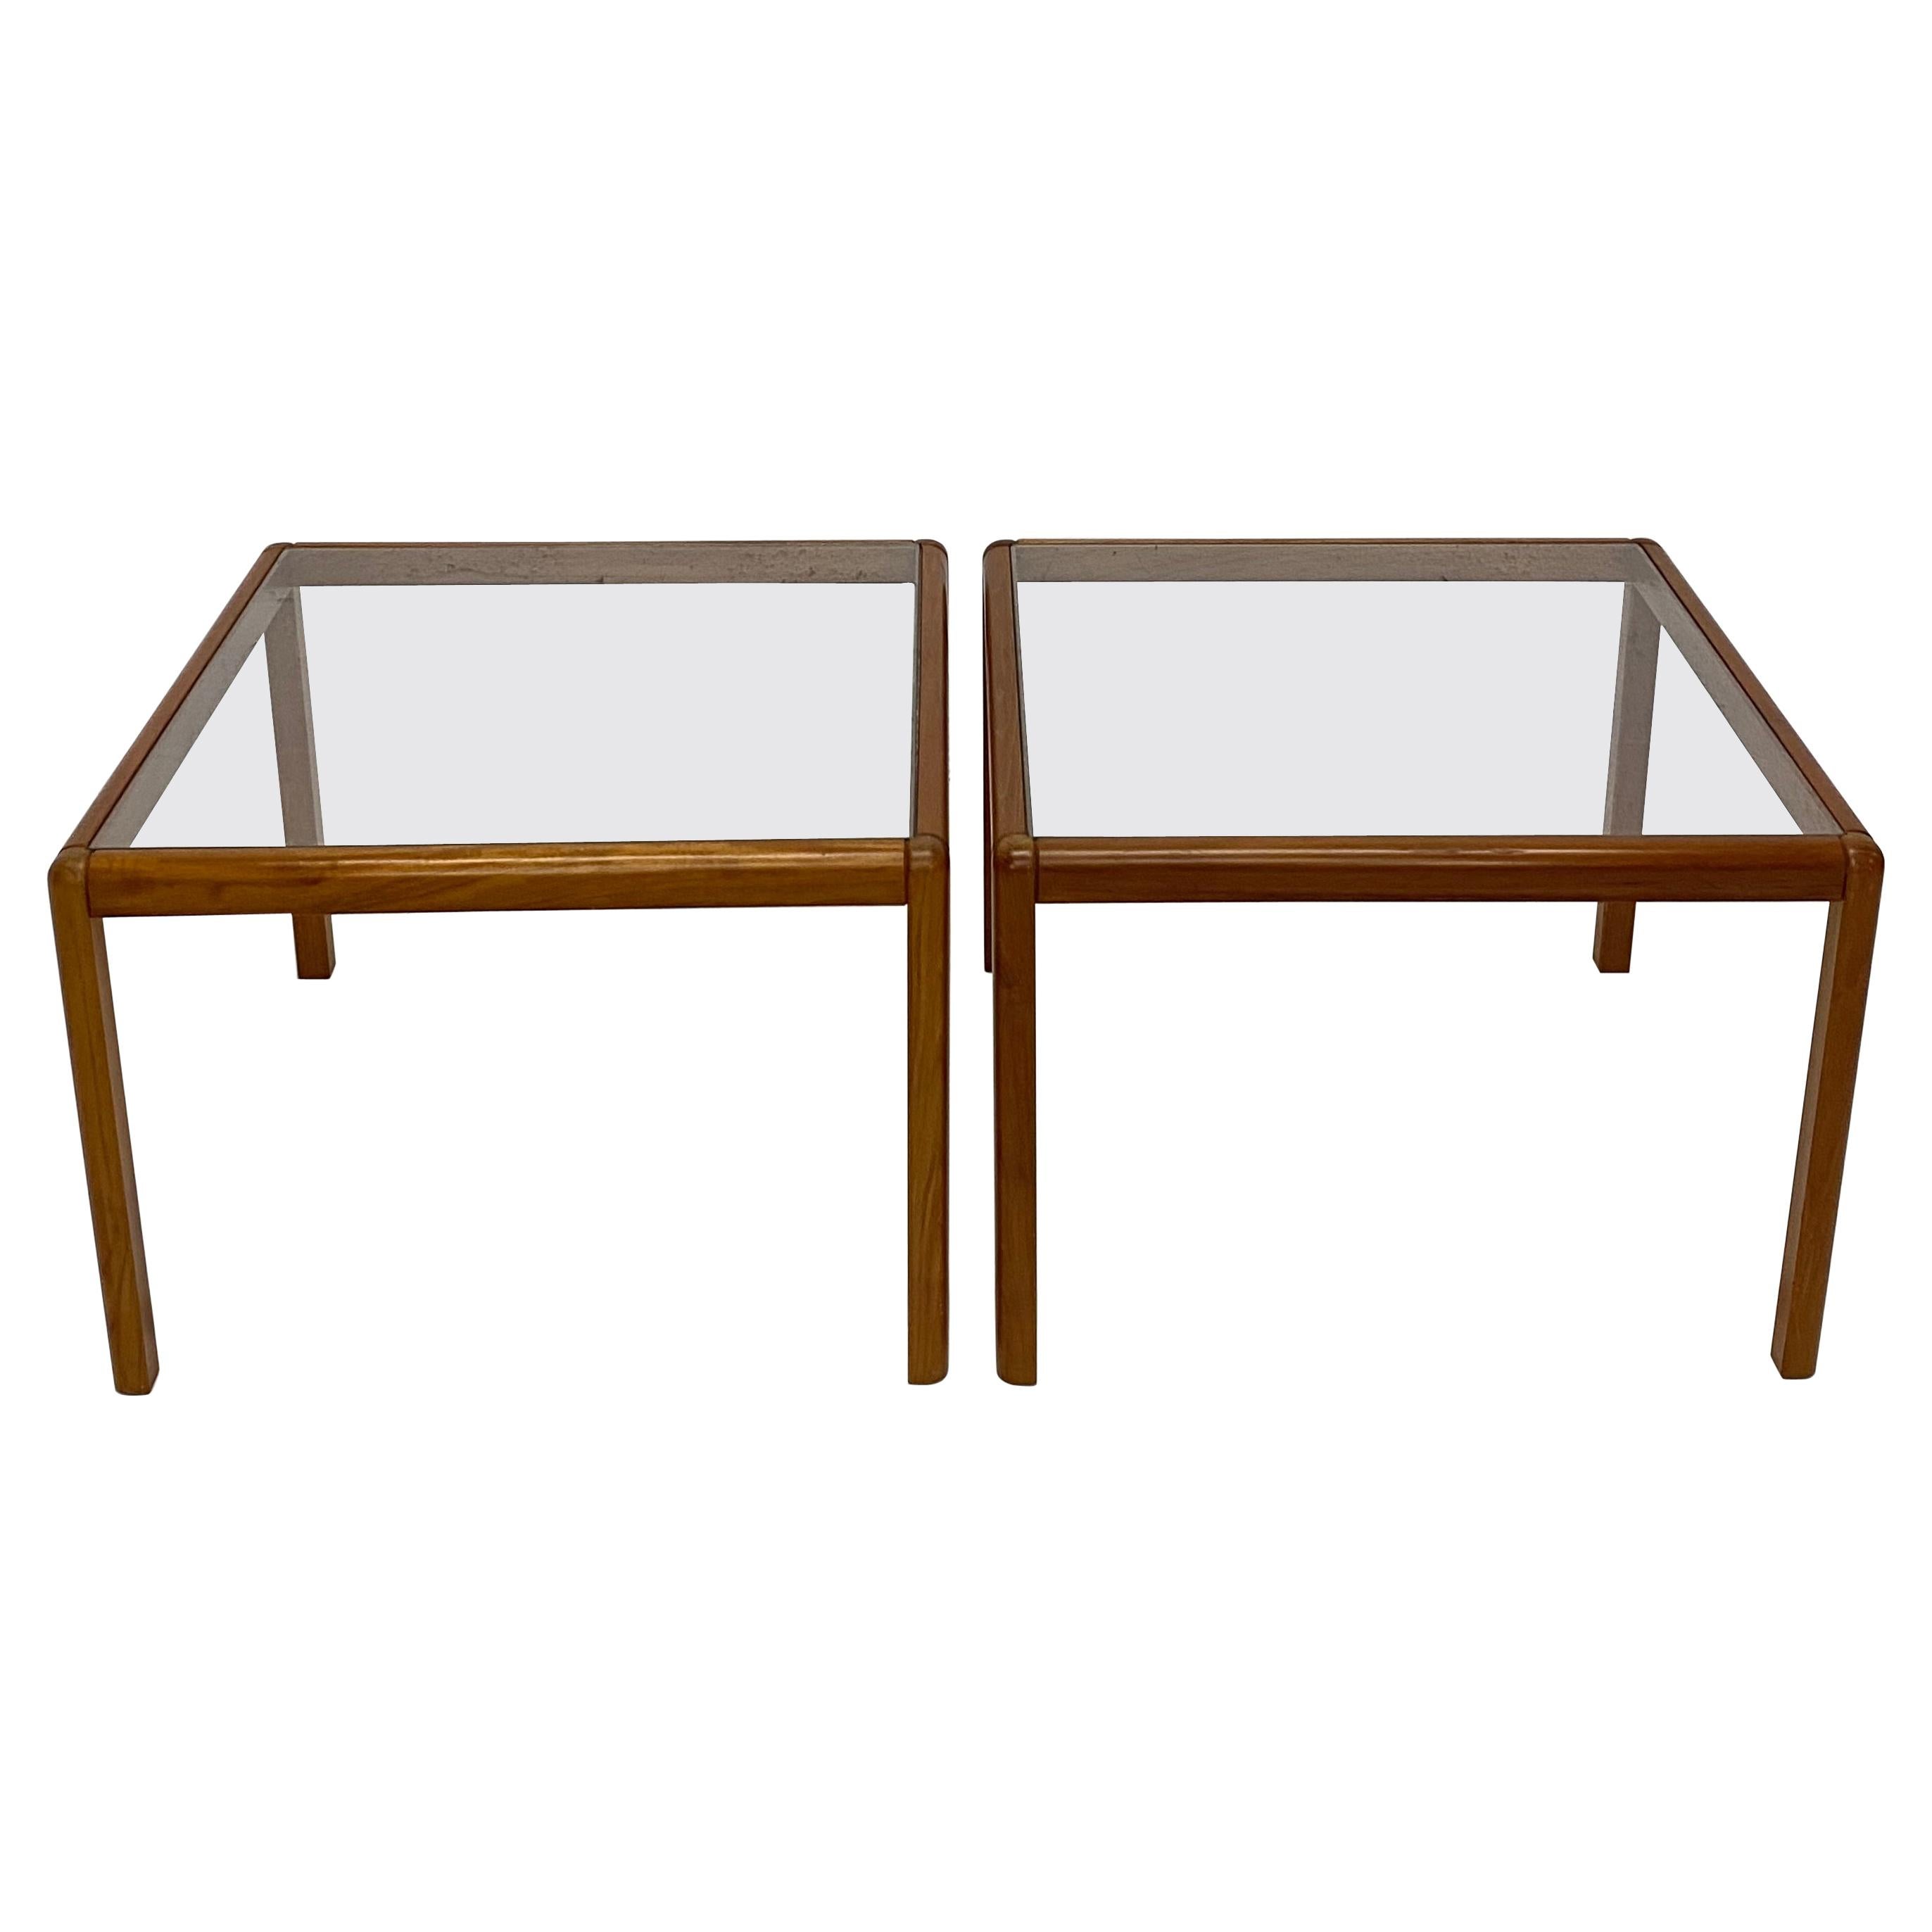 Danish Modern Minimalistic Wood and Glass Side or Coffee Tables, 1970s